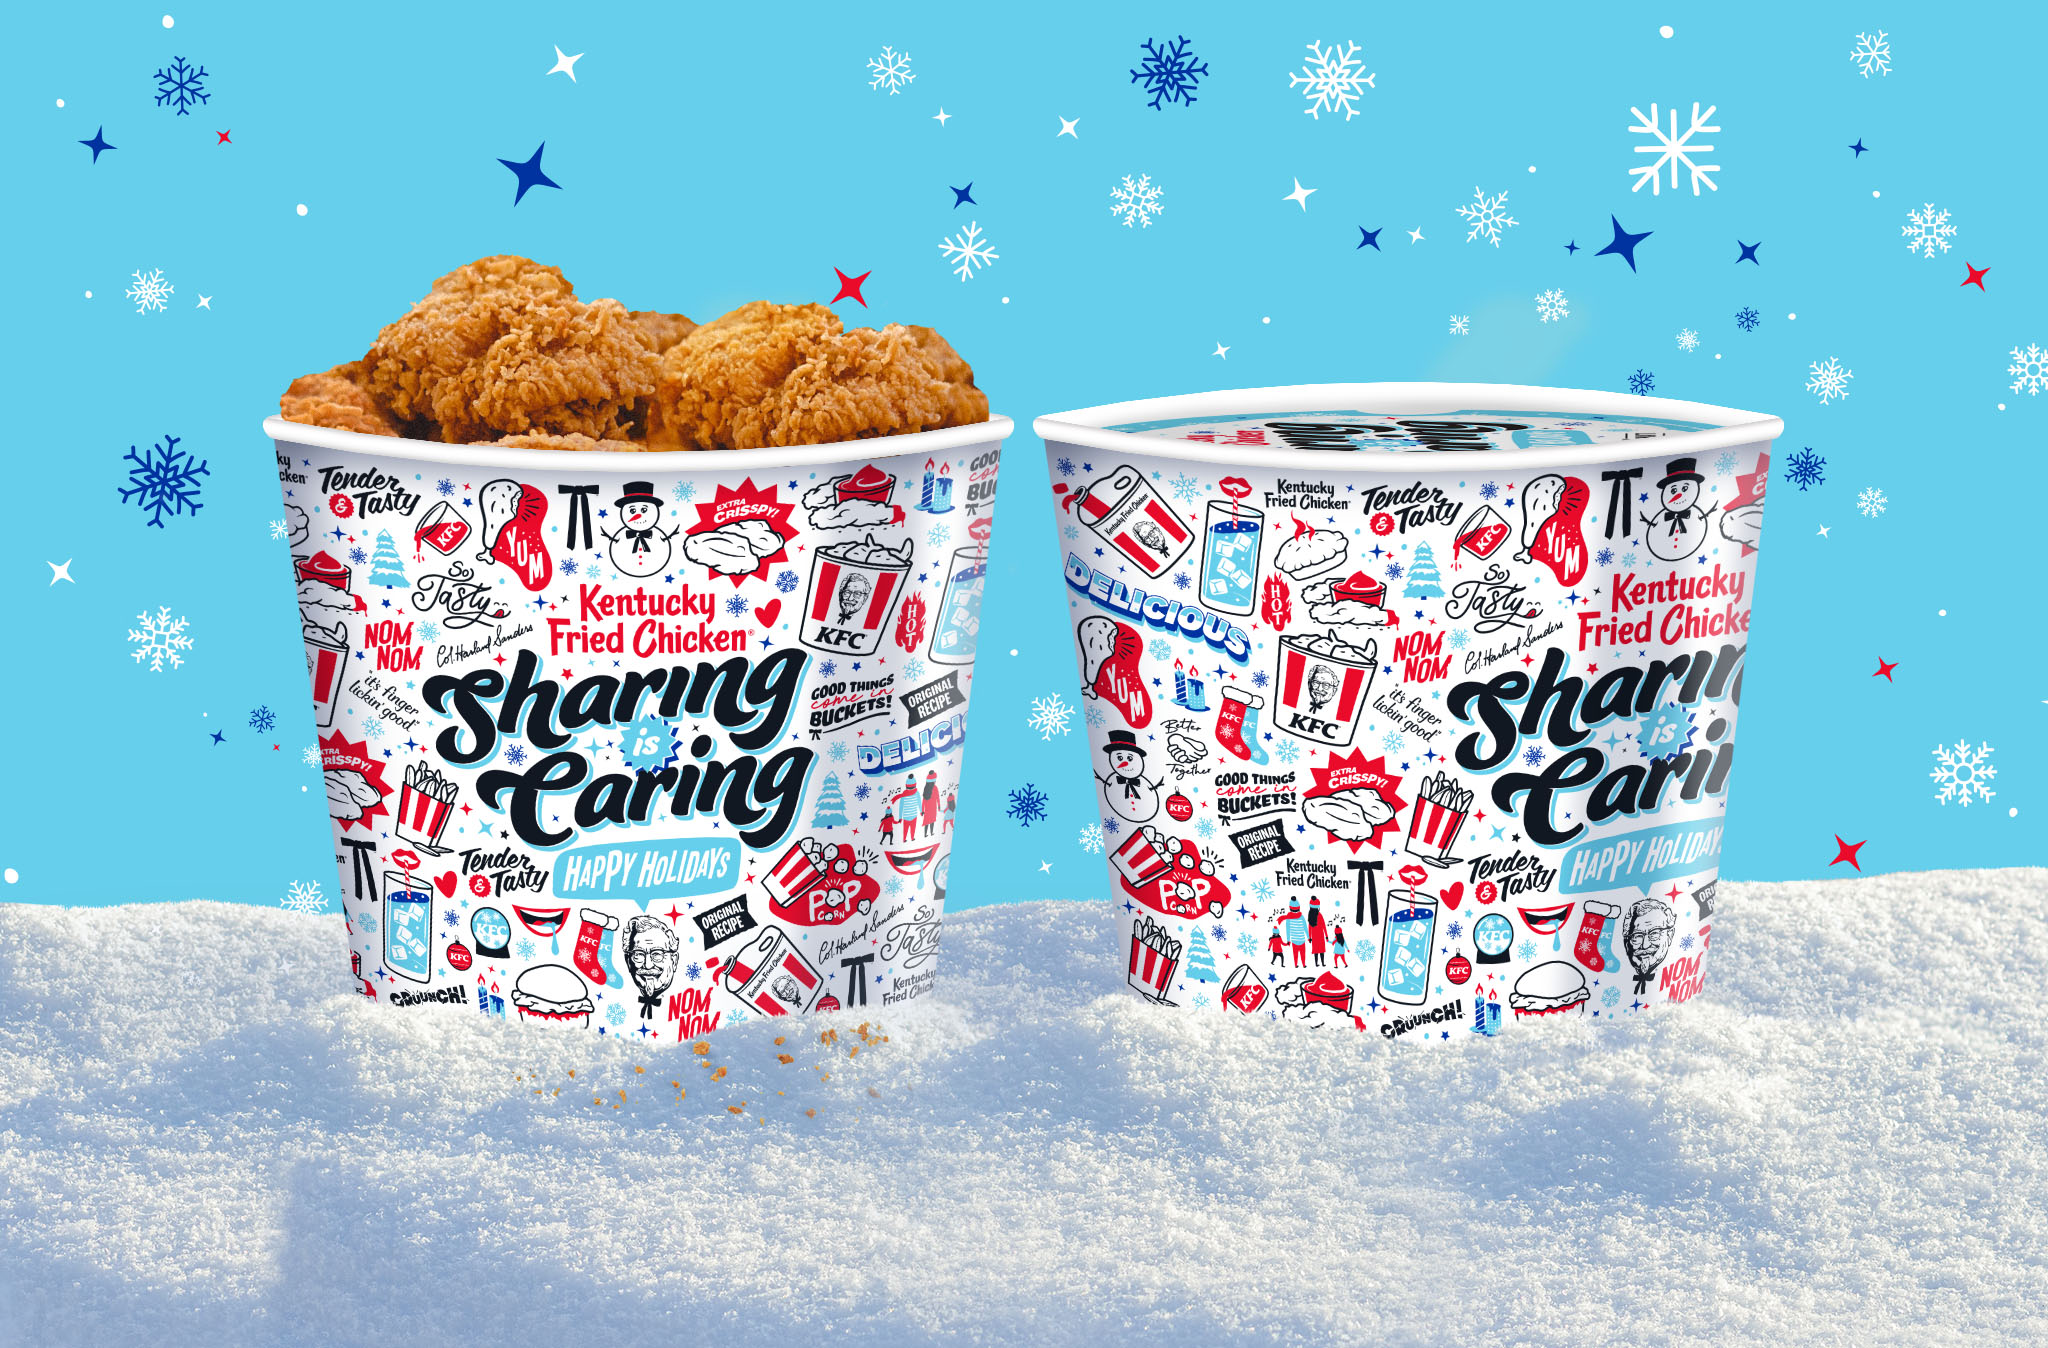 KFC Holiday Bucket. Sharing is Caring packaging design. Creative direction, art direction, design and illustration by Allan Chan Creative.